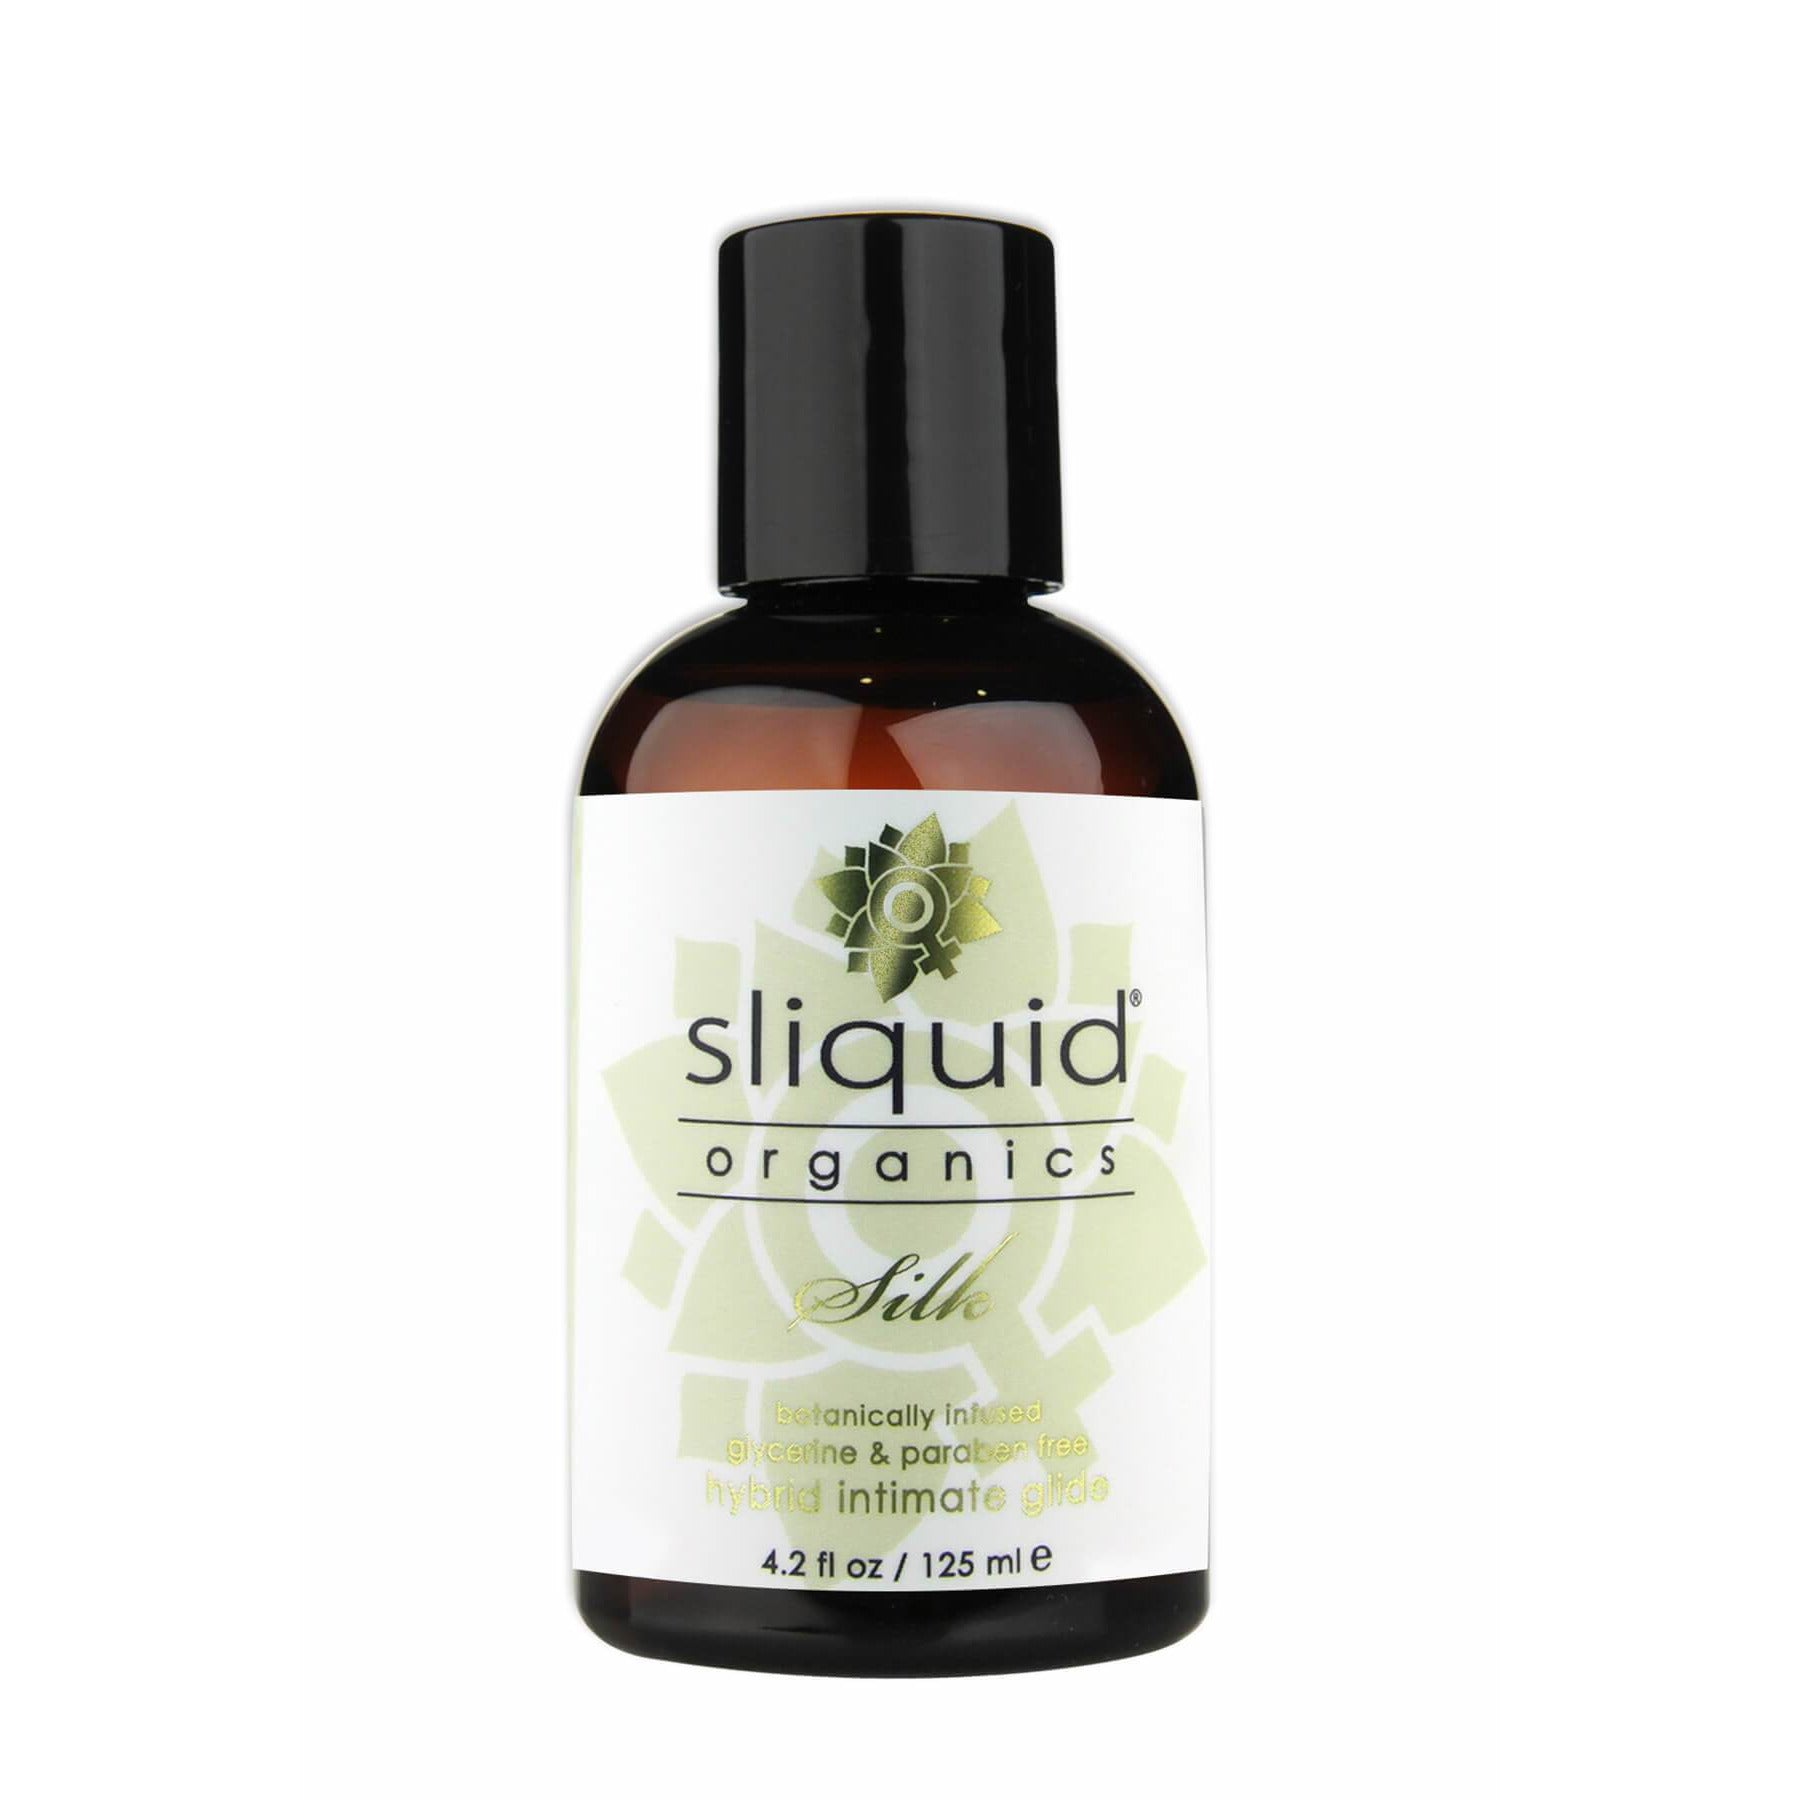 Sliquid Organics Silk Lubricant - by The Bigger O  - an online sex toy shop. We ship to USA, Canada and the UK.